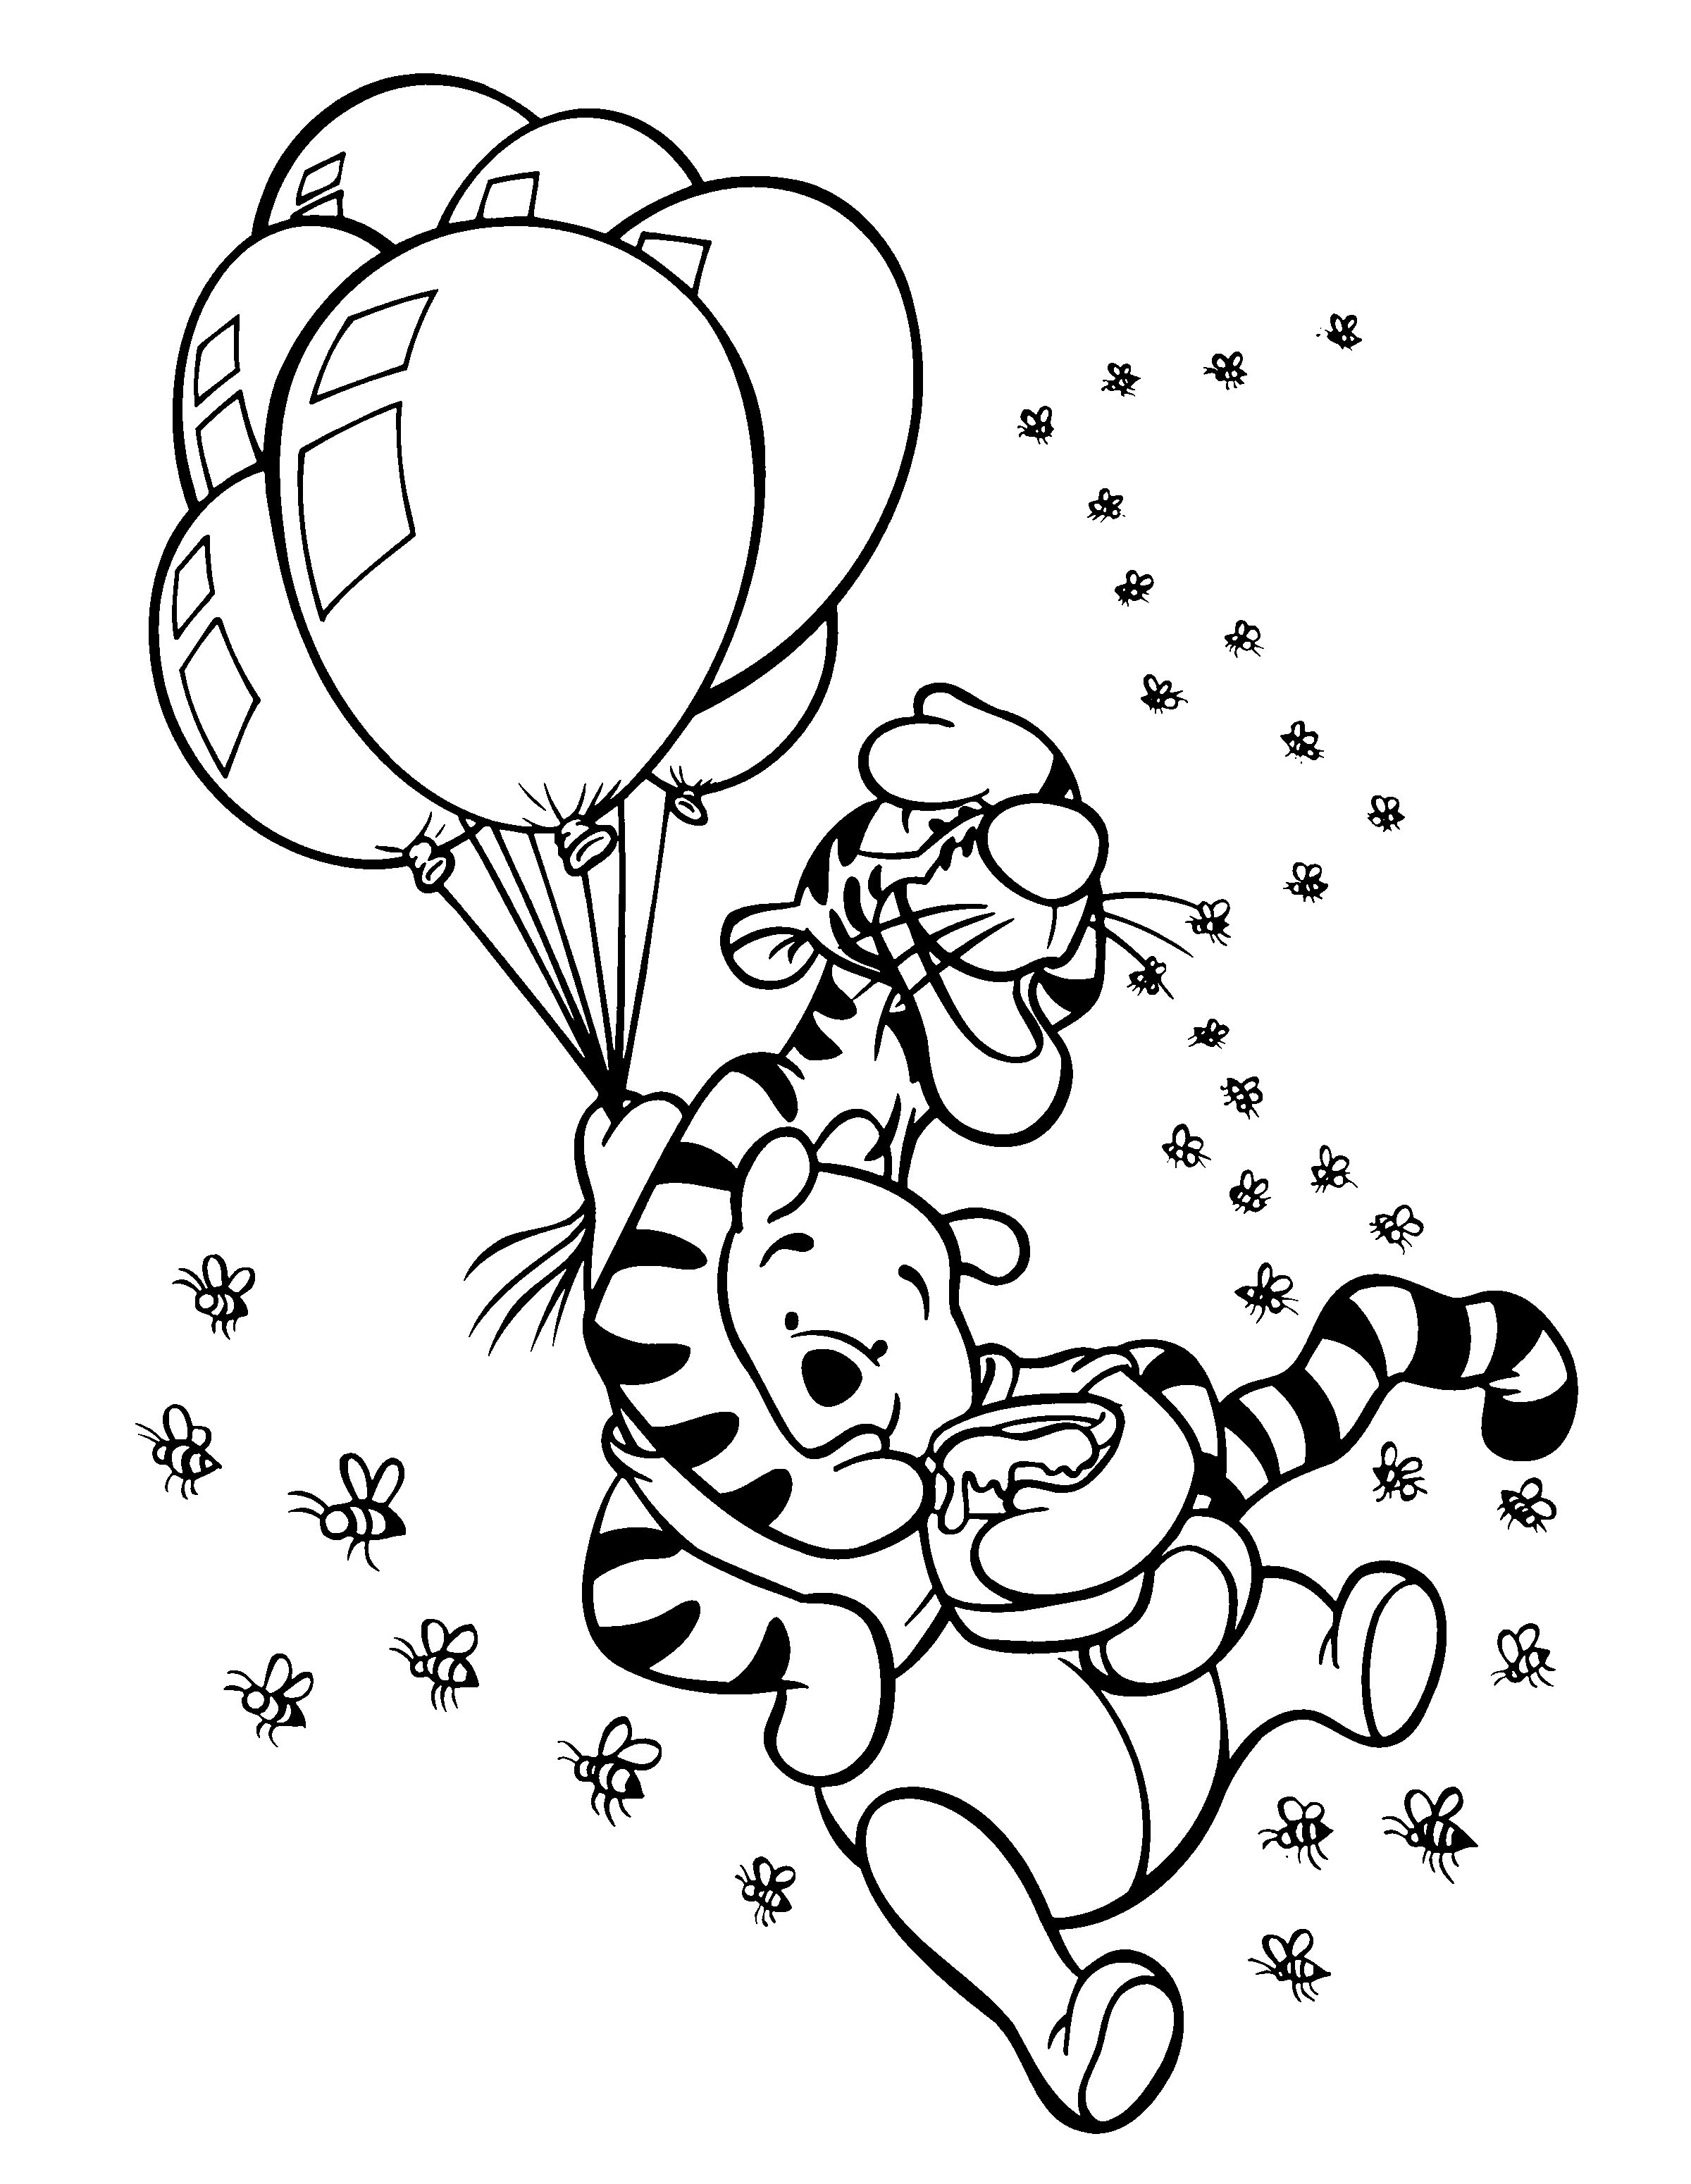 winnie the pooh coloring book download coloring page winnie the pooh coloring pages 61 download the coloring winnie pooh book 